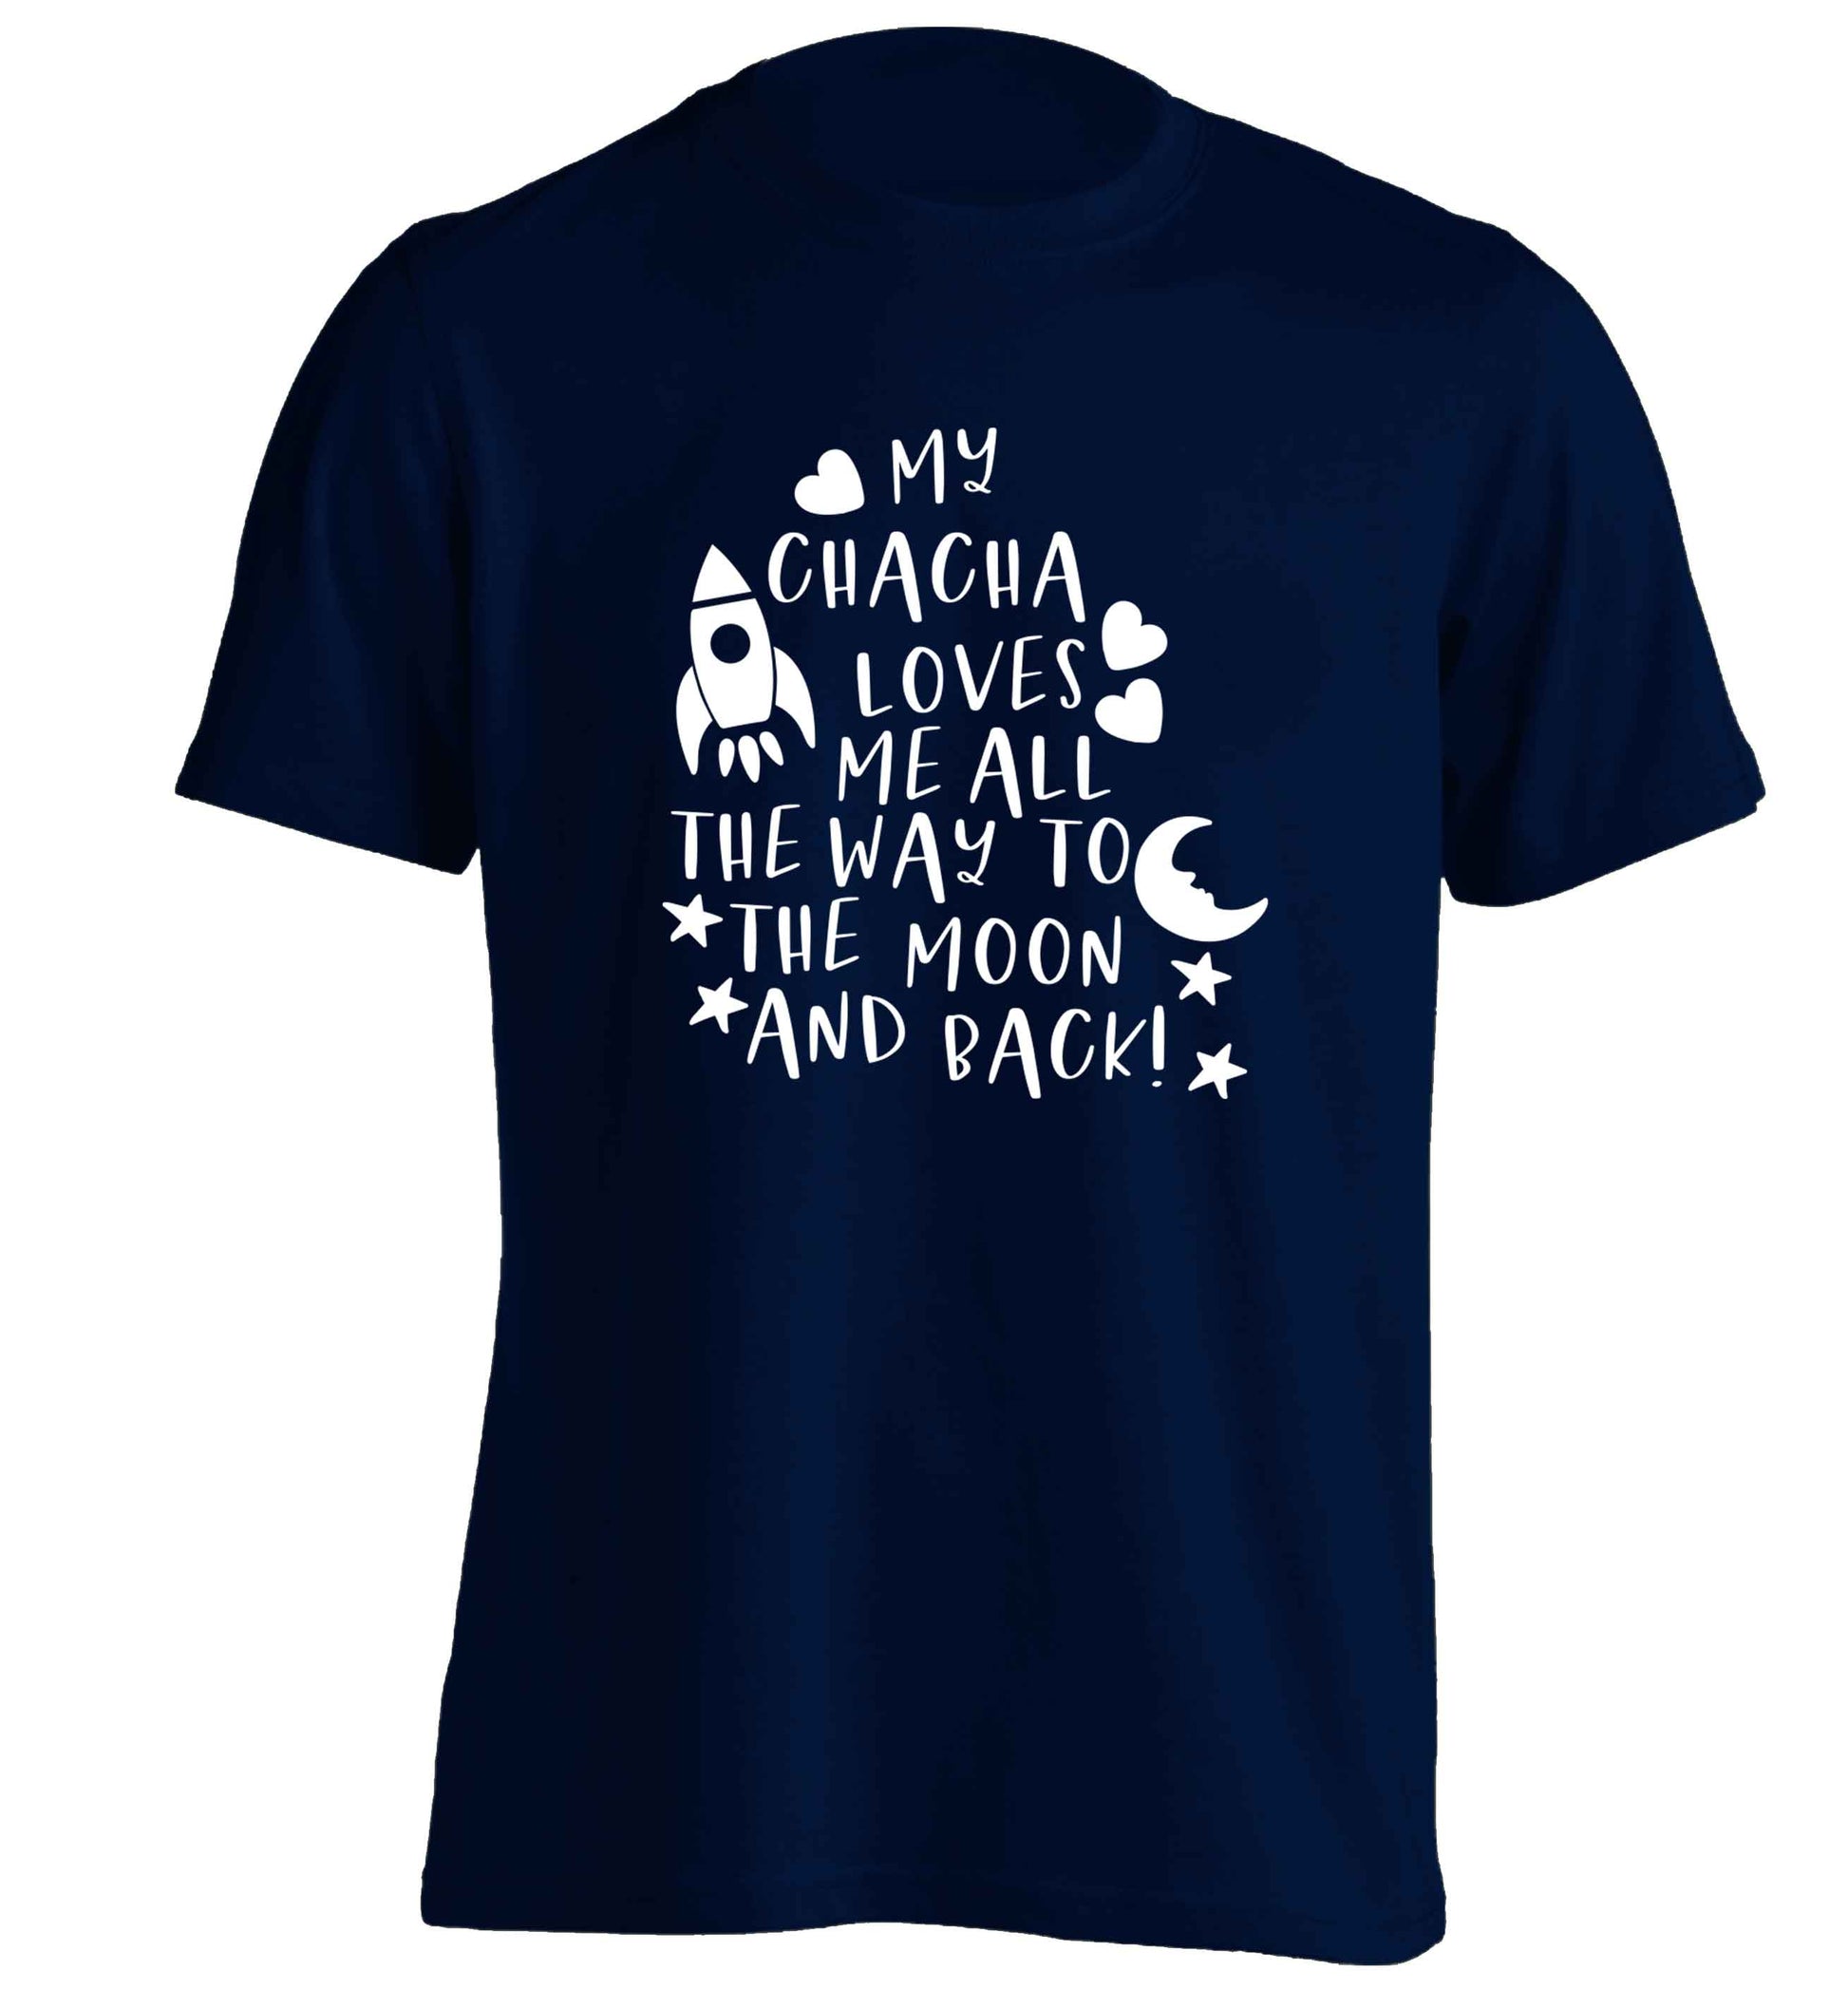 My chacha loves me all the way to the moon and back adults unisex navy Tshirt 2XL